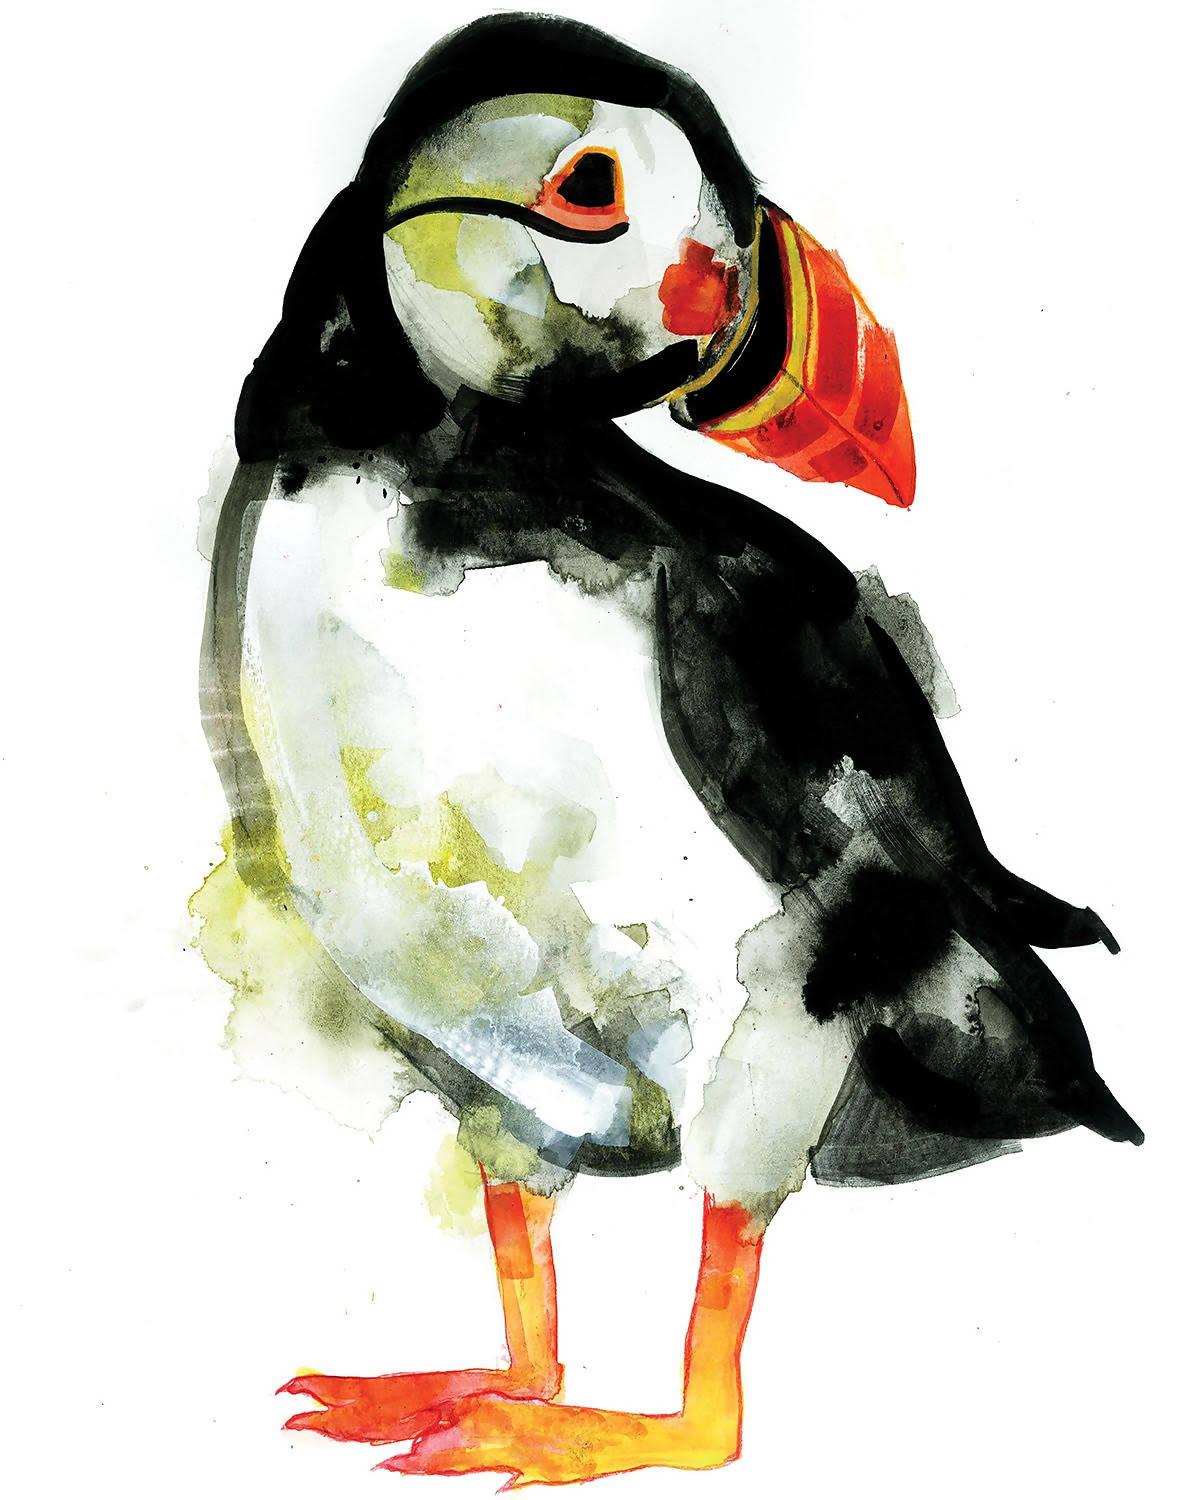 Puffin, Painting by Gavin Dobson
 
Puffin, limited edition silkscreen print
A four layer CYMK elegant and colourful screen print.
Signed 70cm x 50cm on Fabriano paper 310 gsm with a deckled edge.
 
Additional information:
Edition of 100.
Signed and